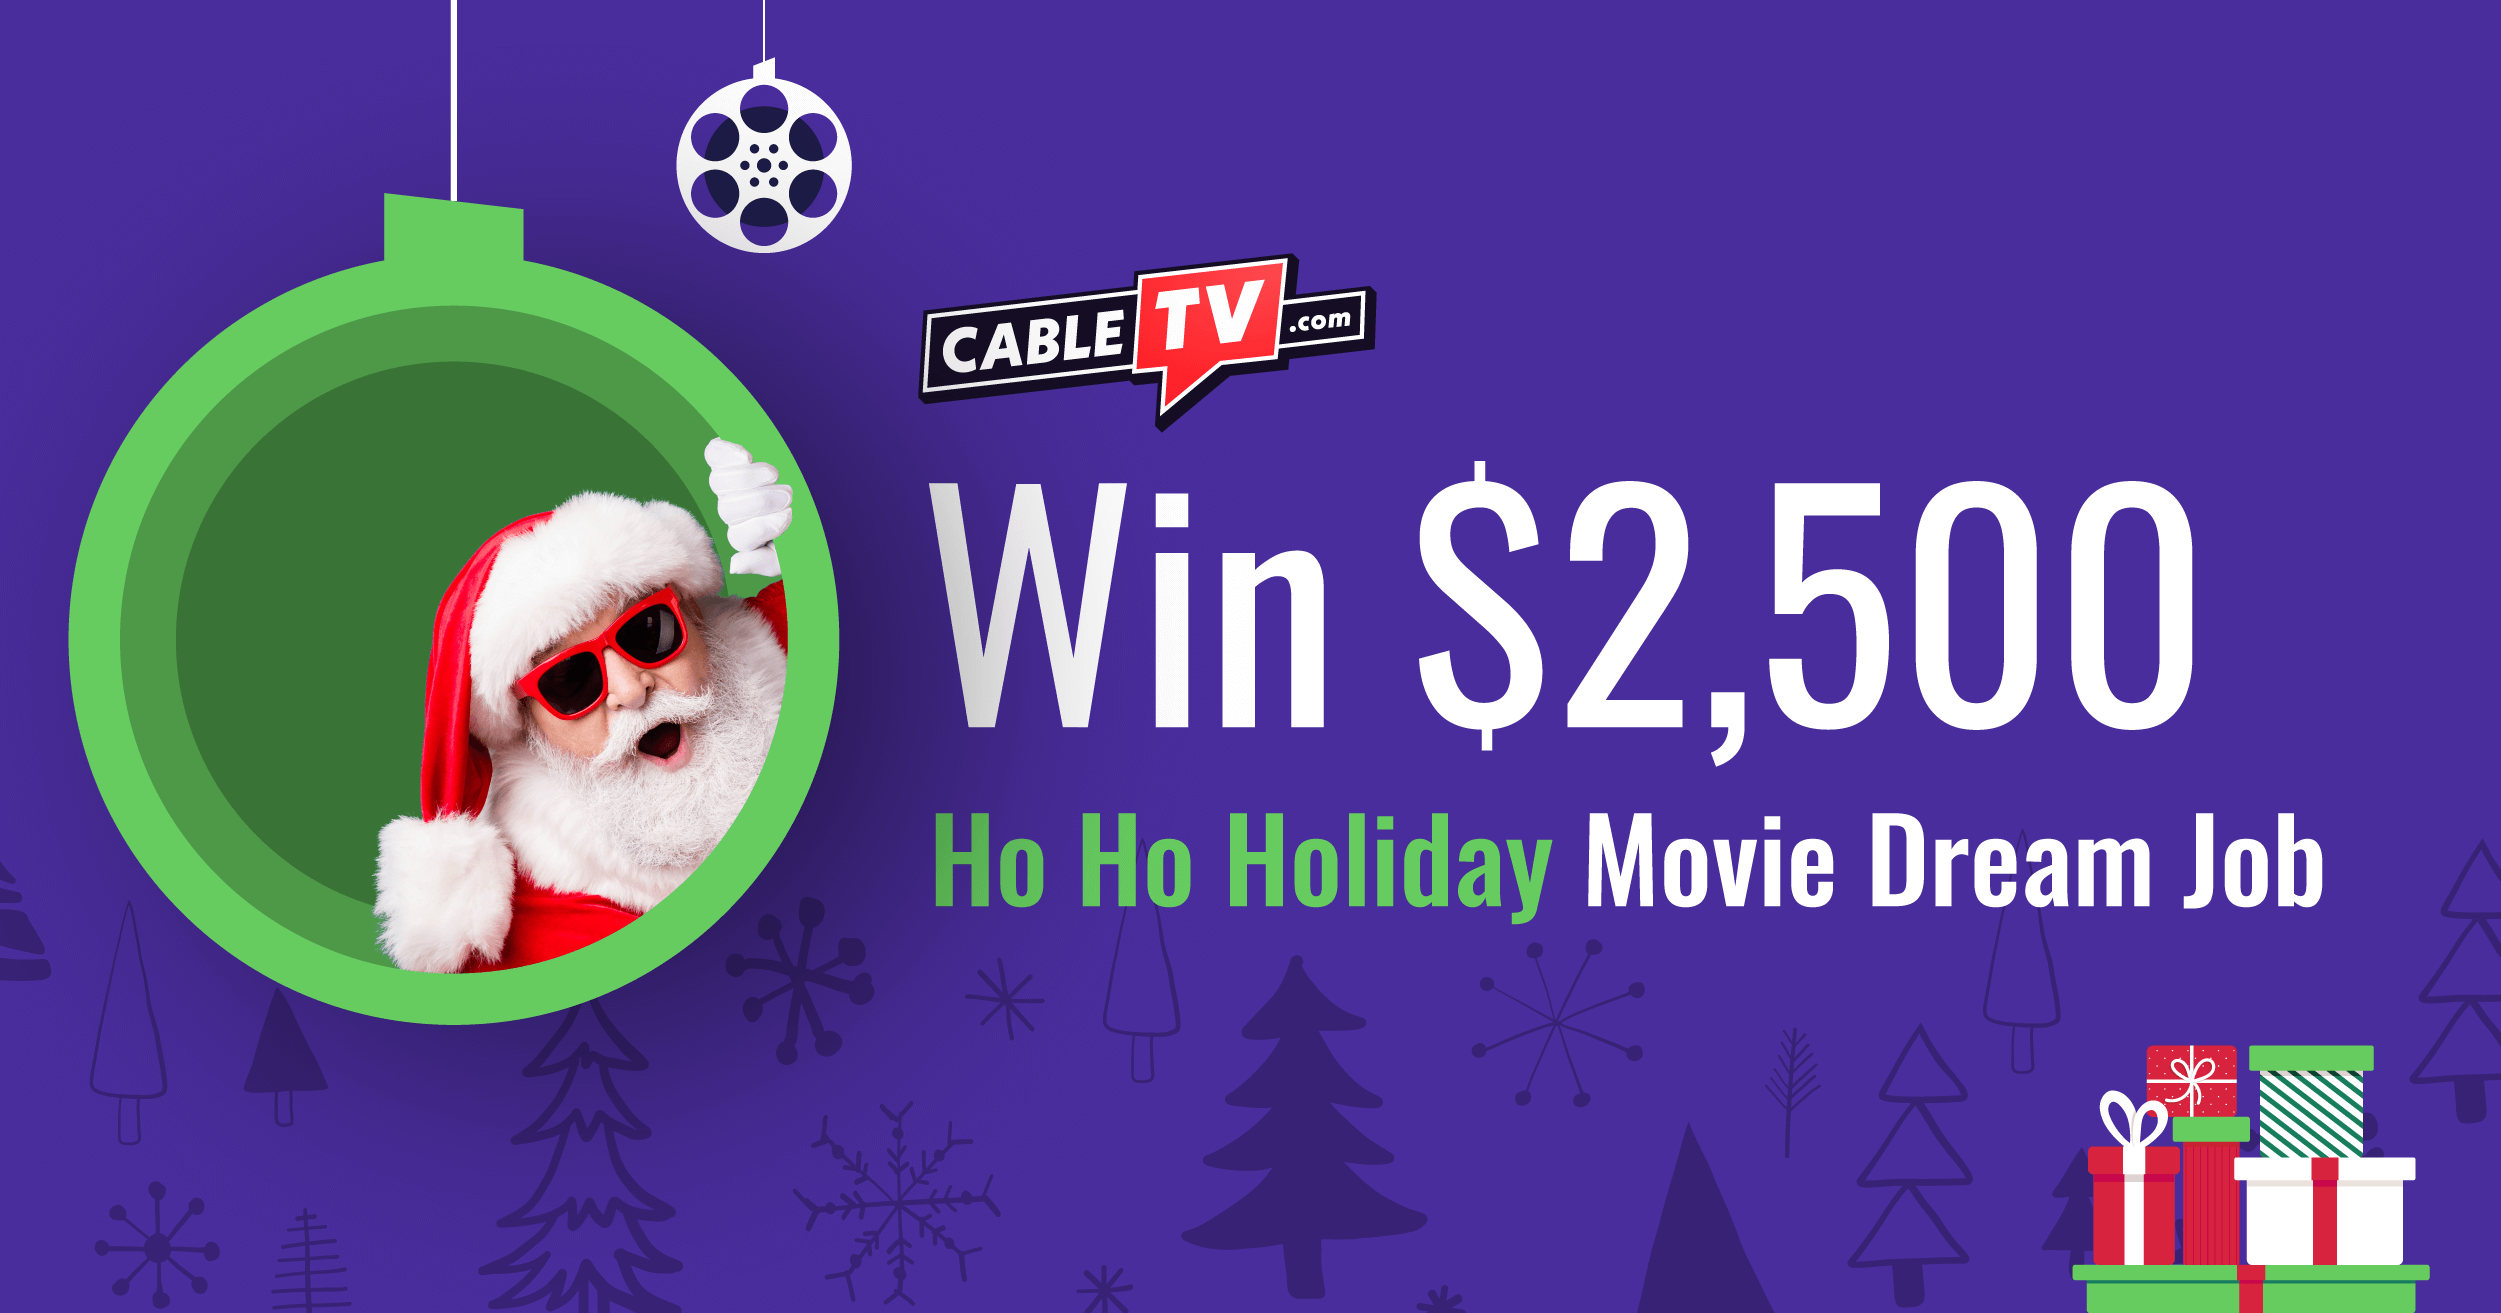 Earn $2,500 by watching 25 holiday movies!